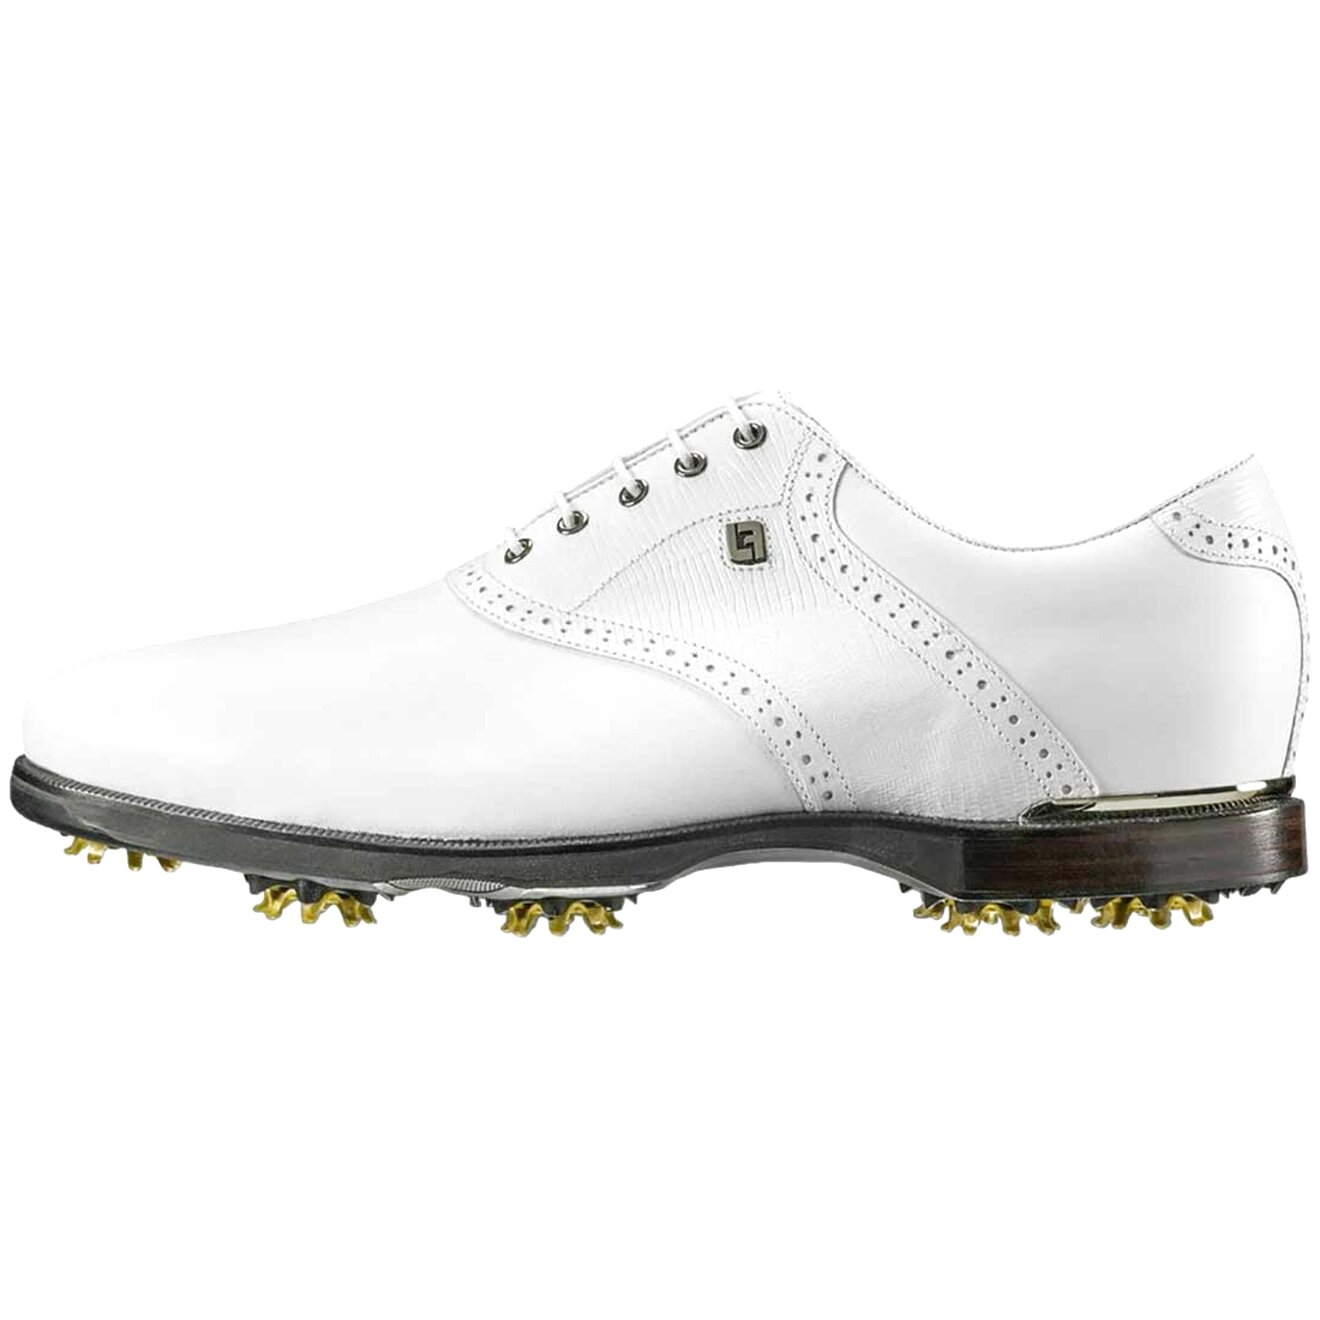 Footjoy Icon Golf Shoes for sale in UK 